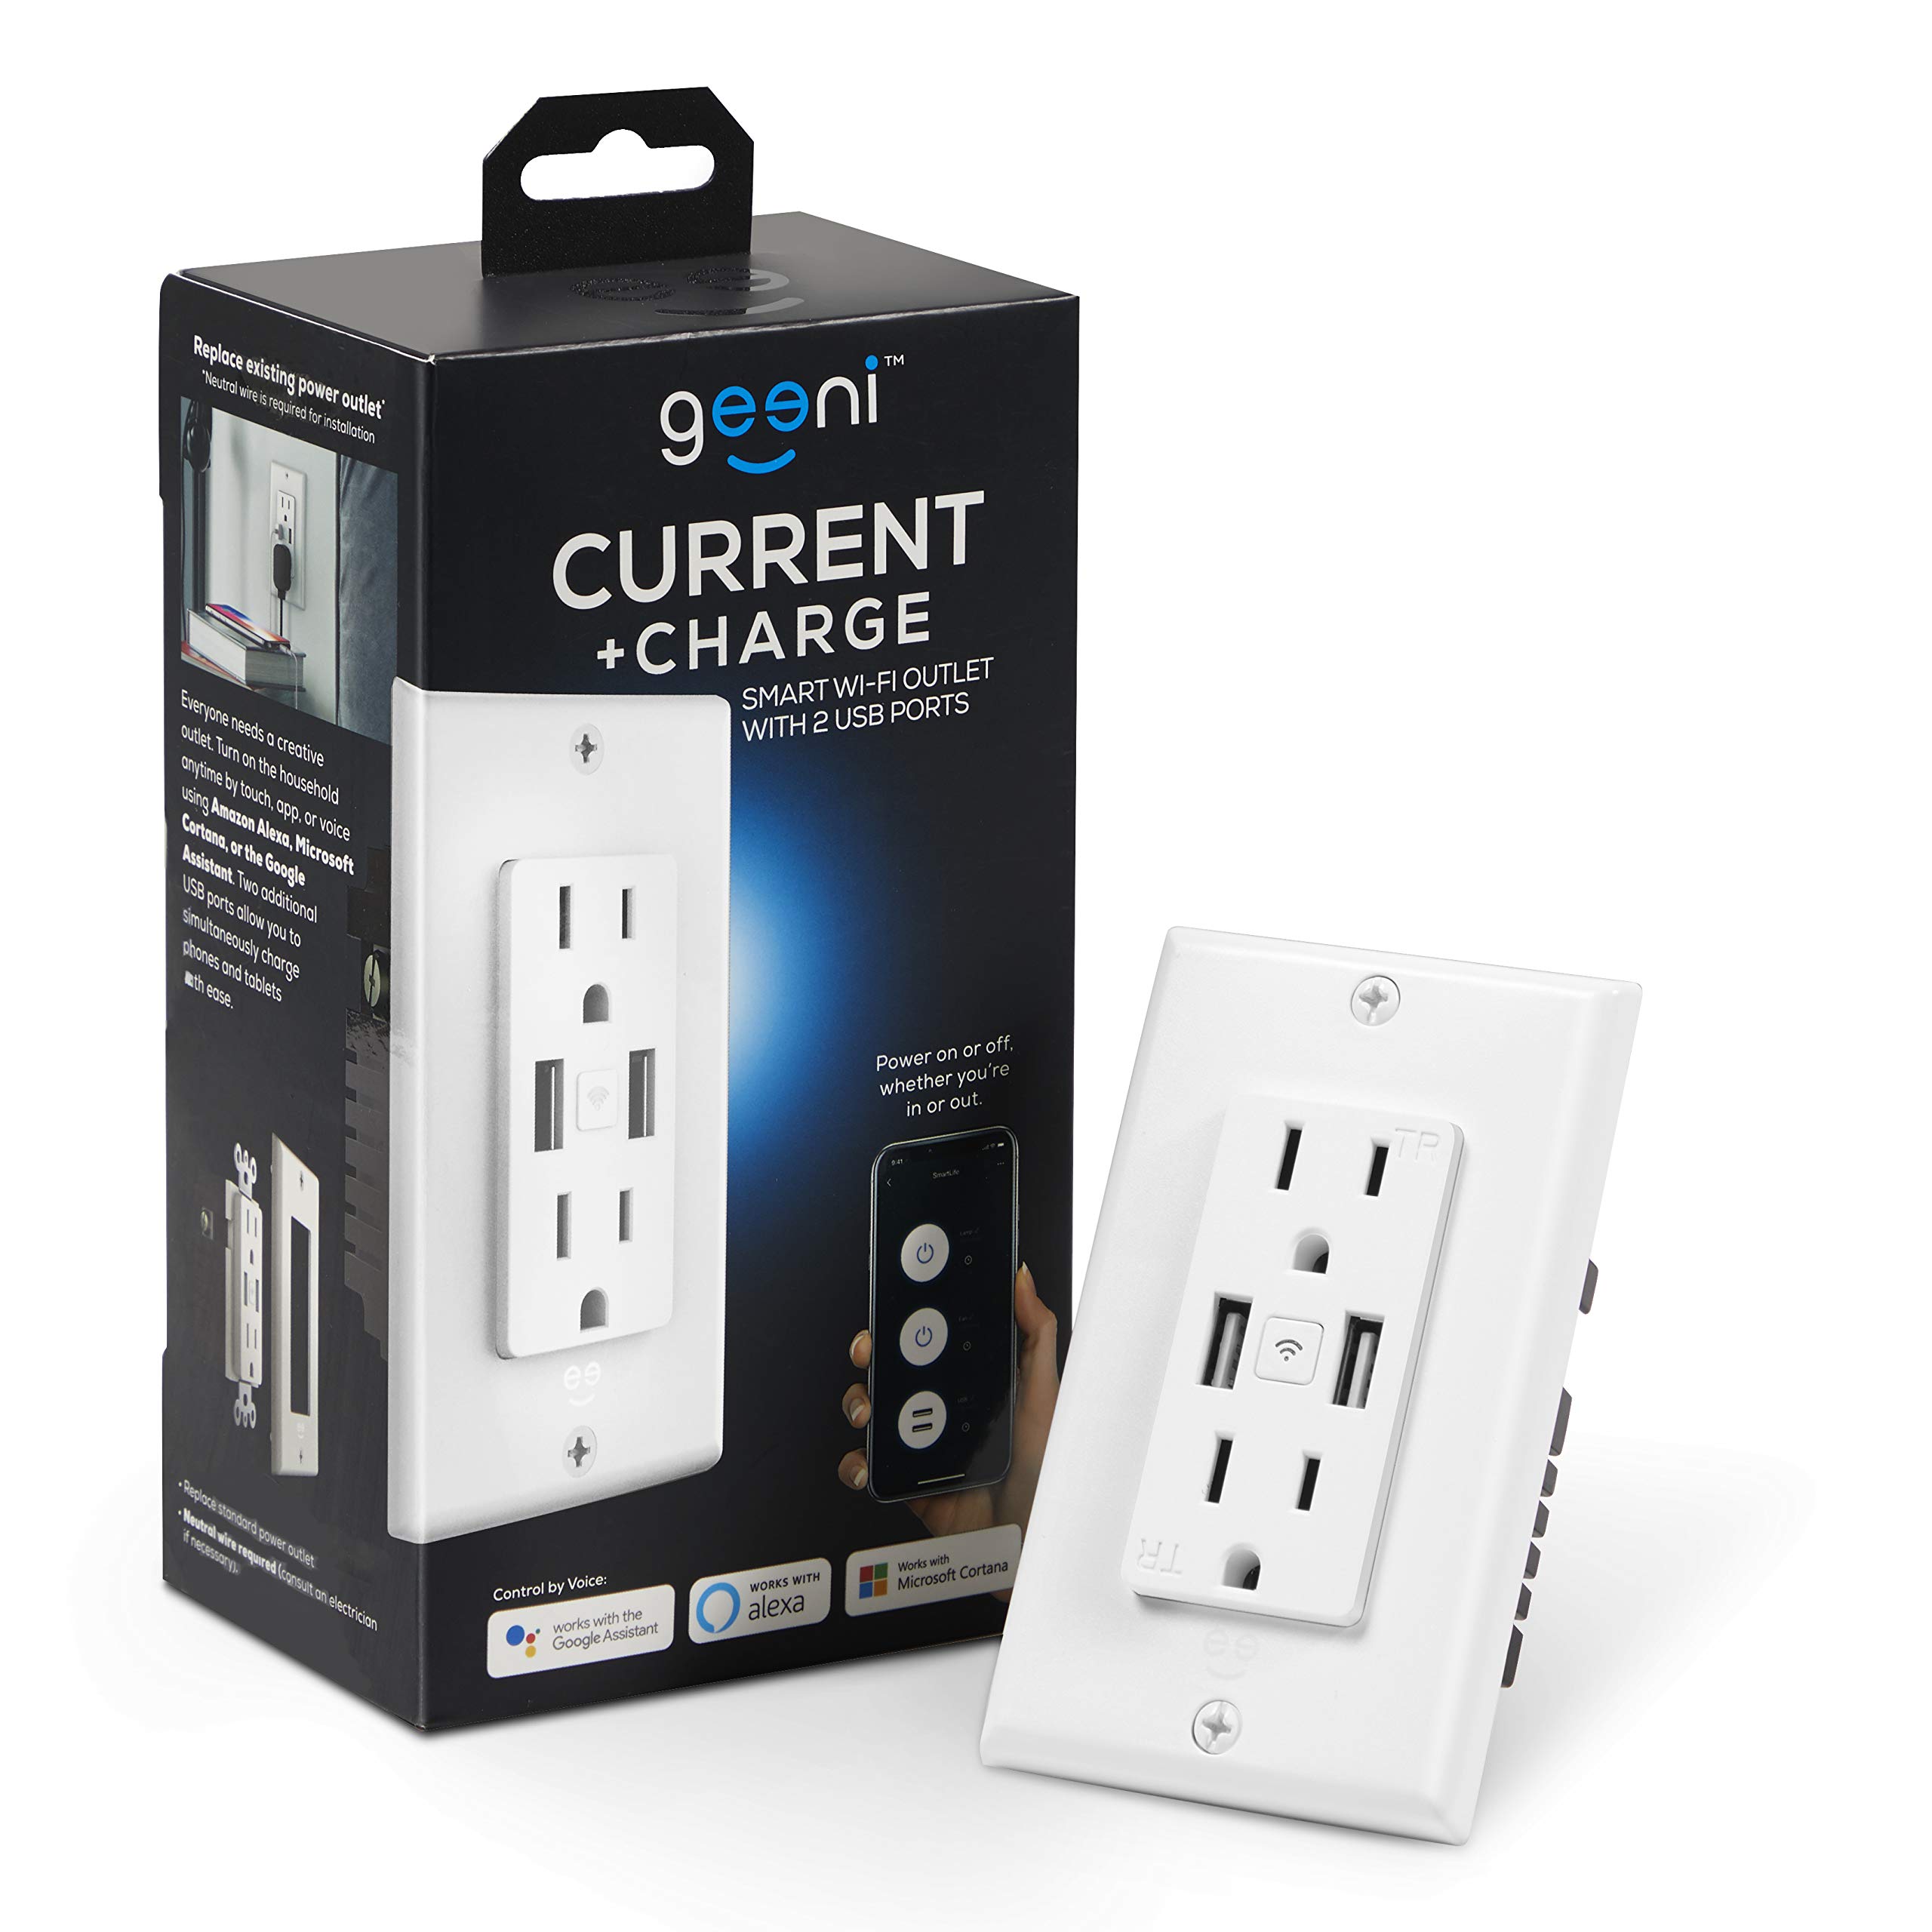 Geeni High Speed USB Charger Smart Outlet, White, 2 Outlets, 2 USB Ports – No Hub Required – Smart Outlet Works with Amazon Alexa, Google Home &, Requires 2.4 GHz Wi-Fi